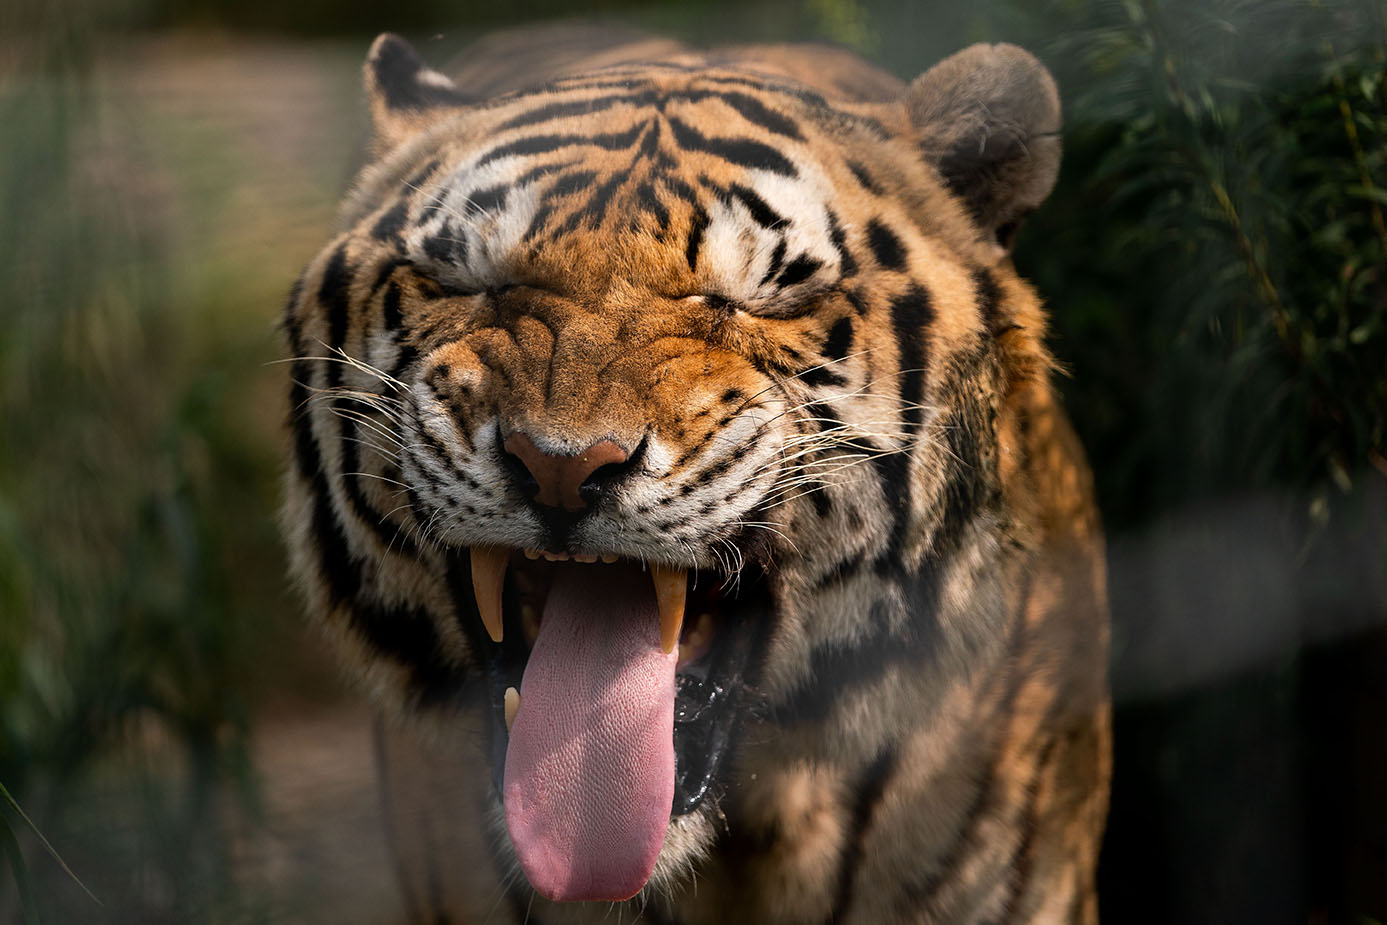 Tiger with its mouth open showing its teeth